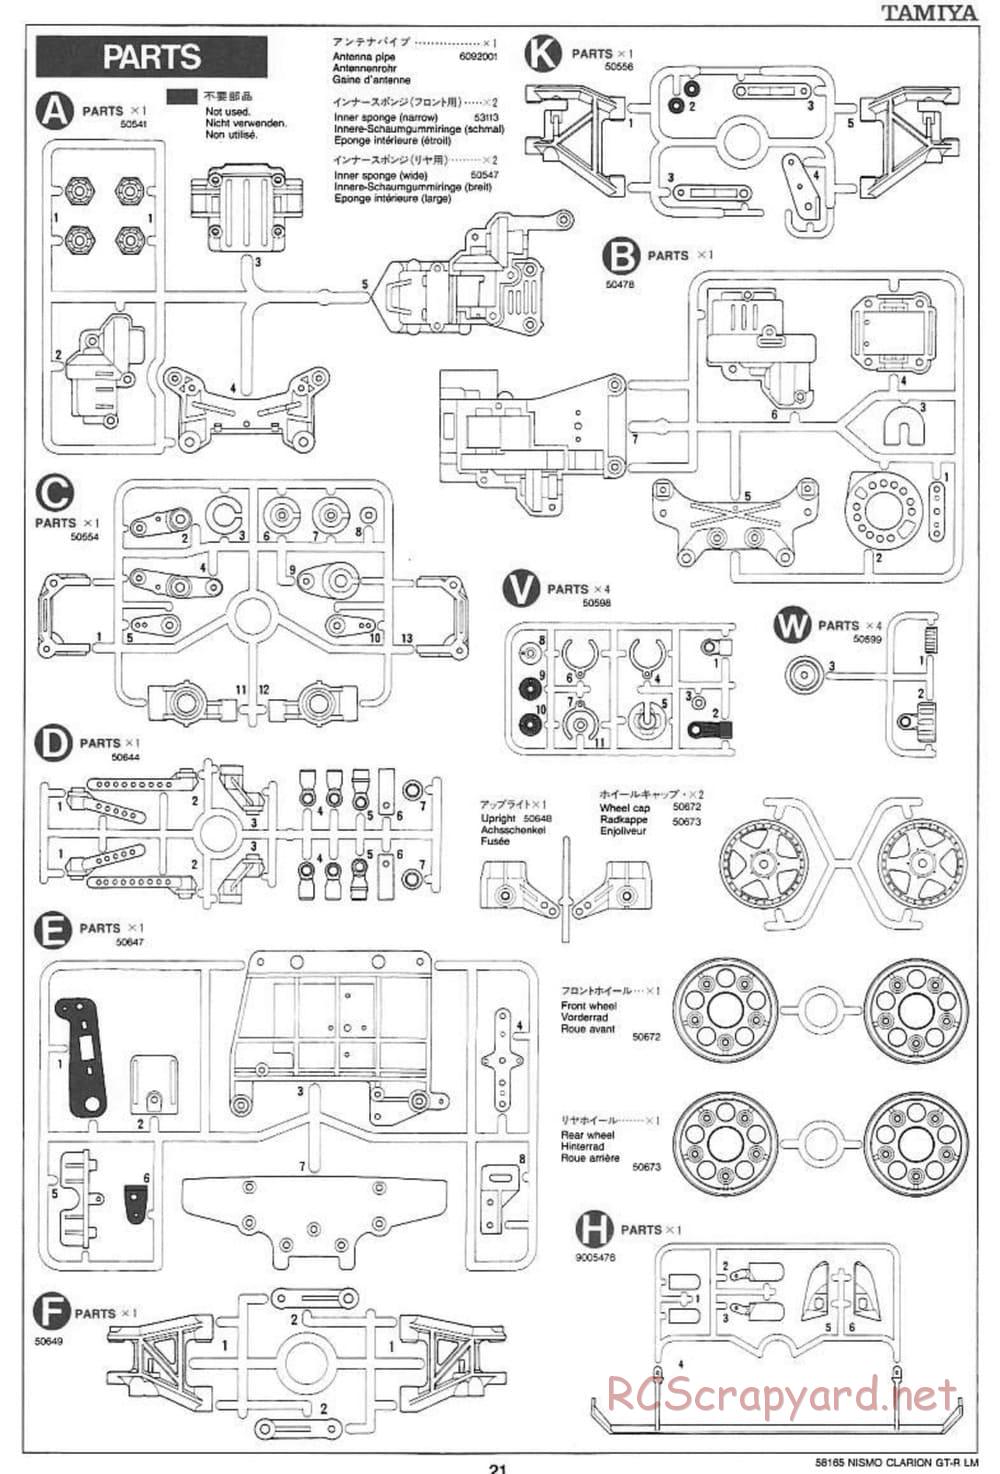 Tamiya - Nismo Clarion GT-R LM - TA-02W Chassis - Manual - Page 21